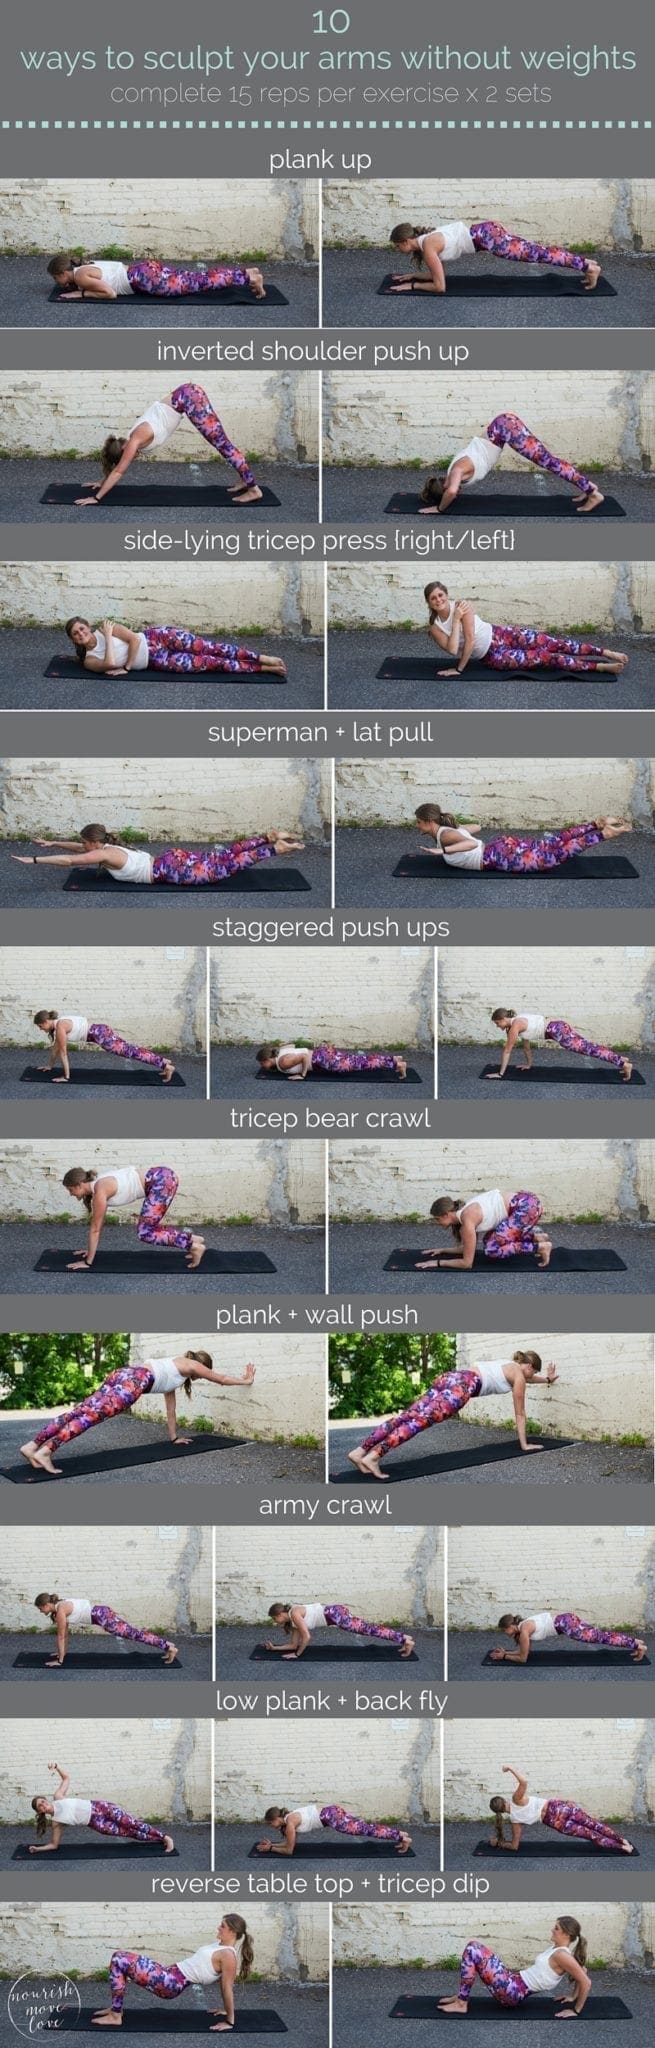 10 ways to sculpt your arms without weights | sculpt seriously strong arms with these 10 equipment-free, upper body exercises you can do anywhere. | www.nourishmovelove.com